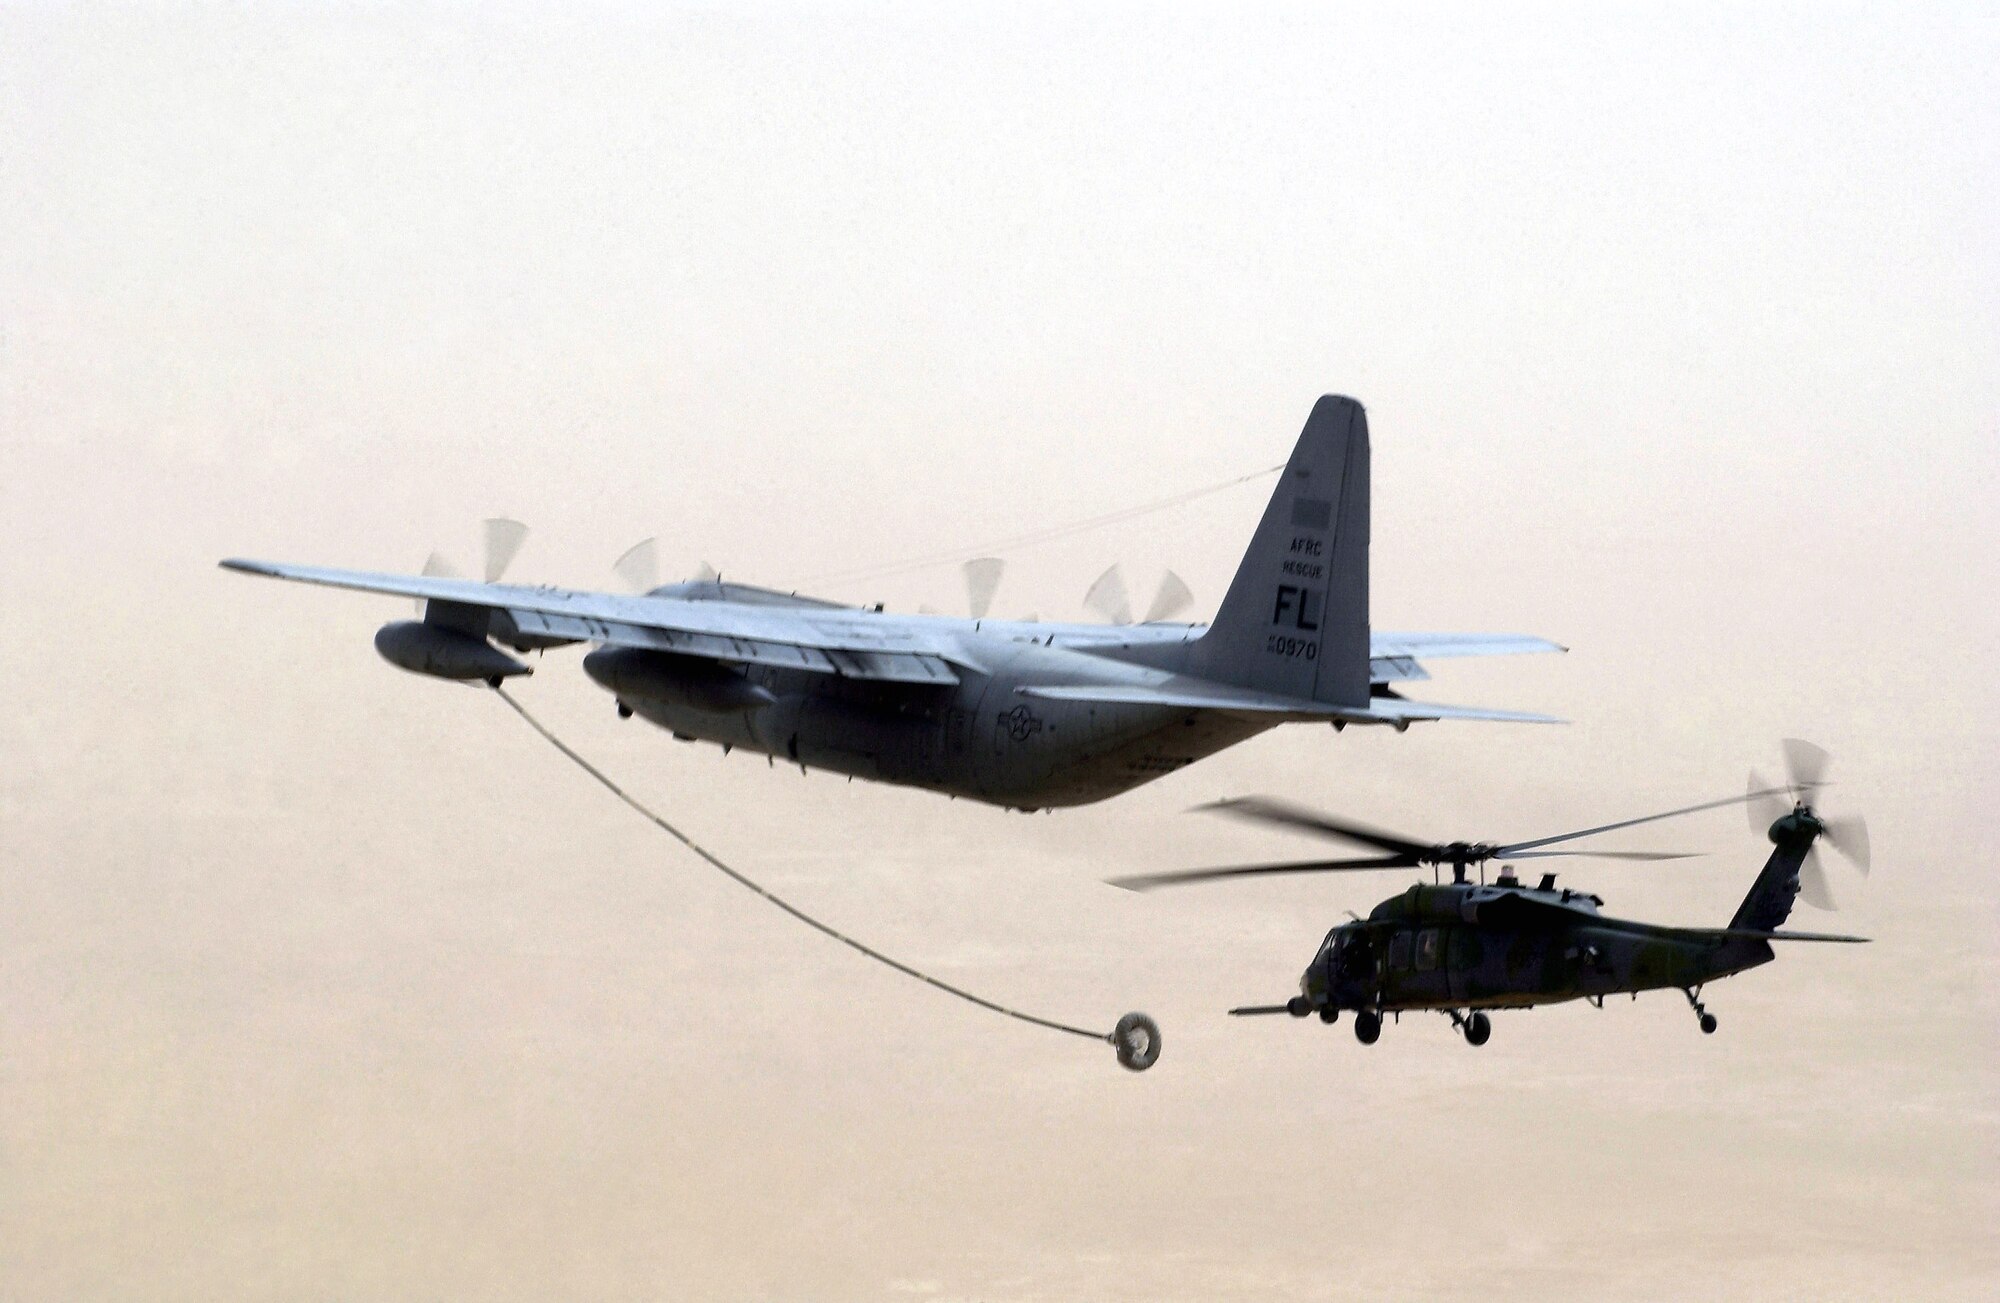 An HH-60G Pave Hawk helicopter approaches the refueling drogue of an HC-130P/N Hercules long-range refueling aircraft. Similar aircraft with 920th Rescue Wing rescue crews from Patrick Air Force Base, Fla., are joining in the search for two NFL players and one other boater missing in the Gulf of Mexico. (U.S. Air Force photo)
